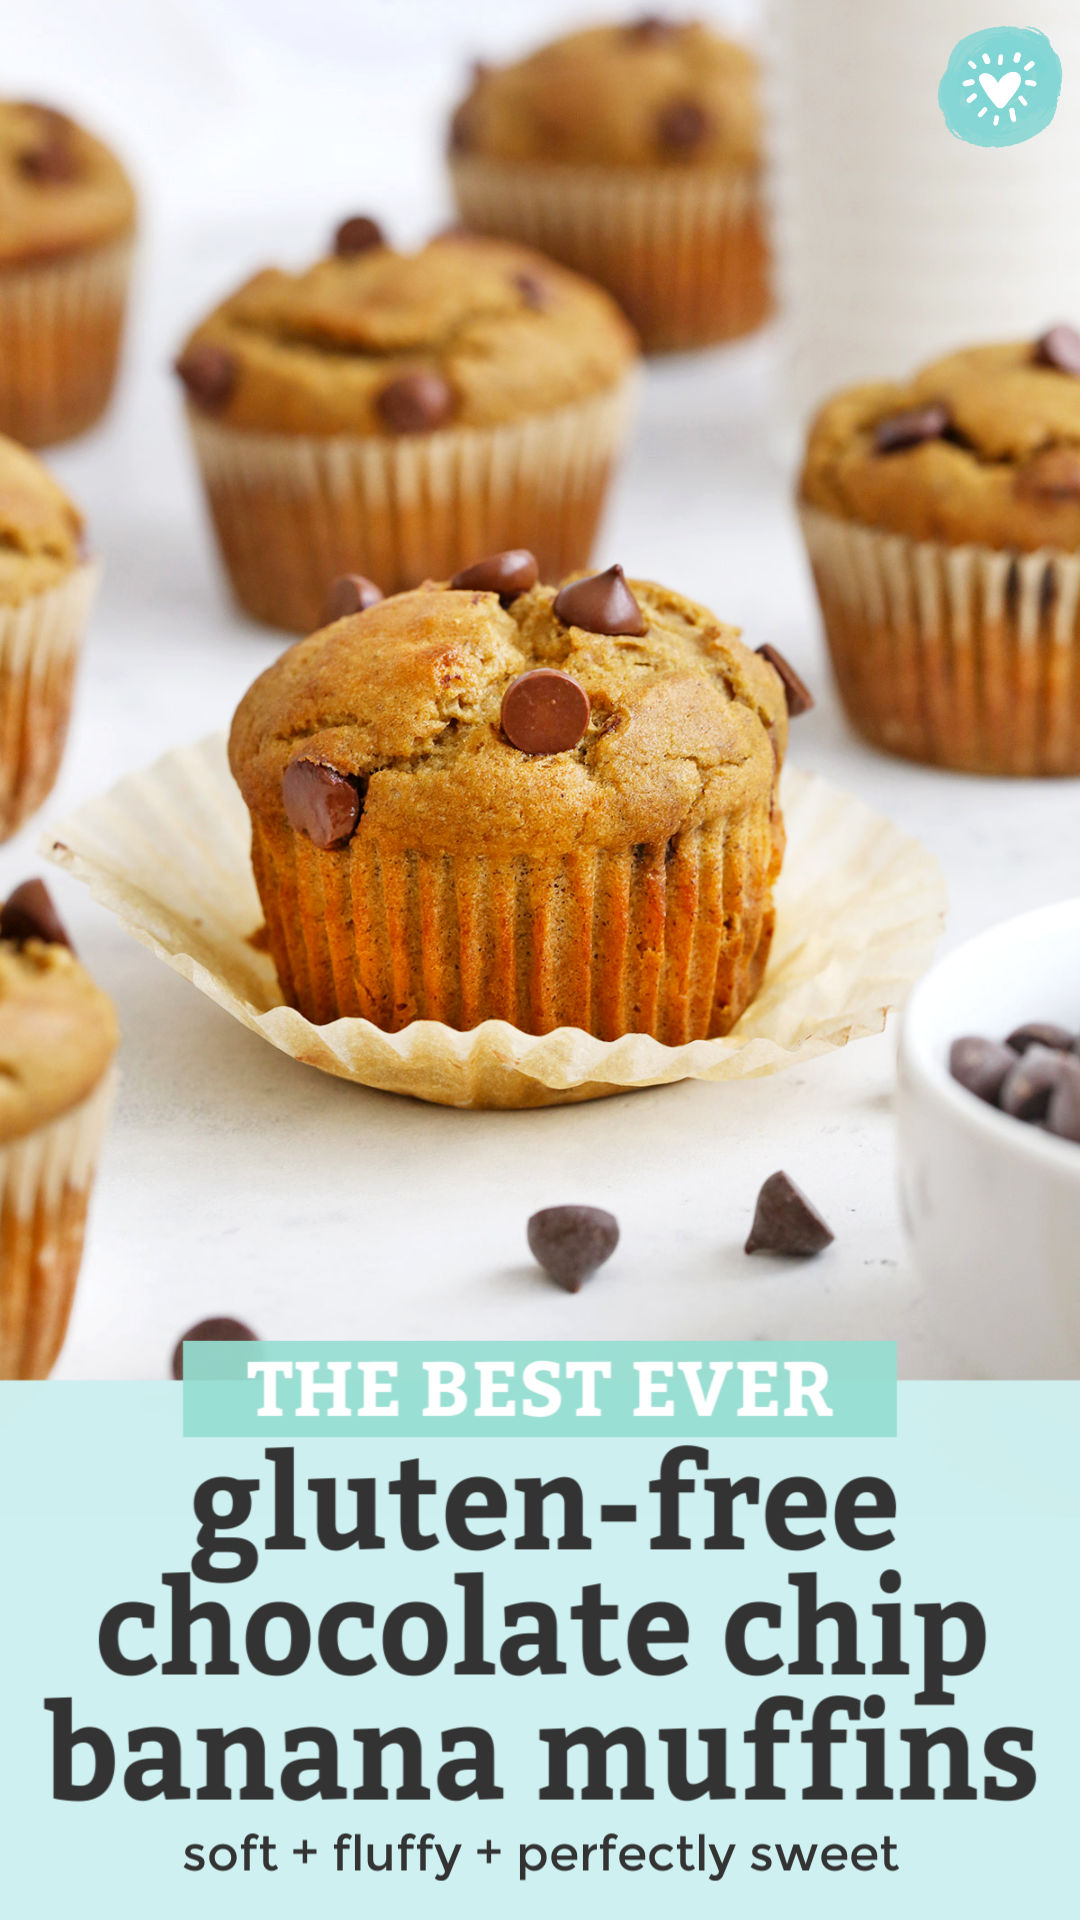 Gluten-Free Chocolate Chip Banana Muffins on a white background with chocolate chips scattered around them, with text overlay that reads "The Best Ever Gluten-Free Chocolate Chip Banana Muffins. Soft + fluffy + perfectly sweet."